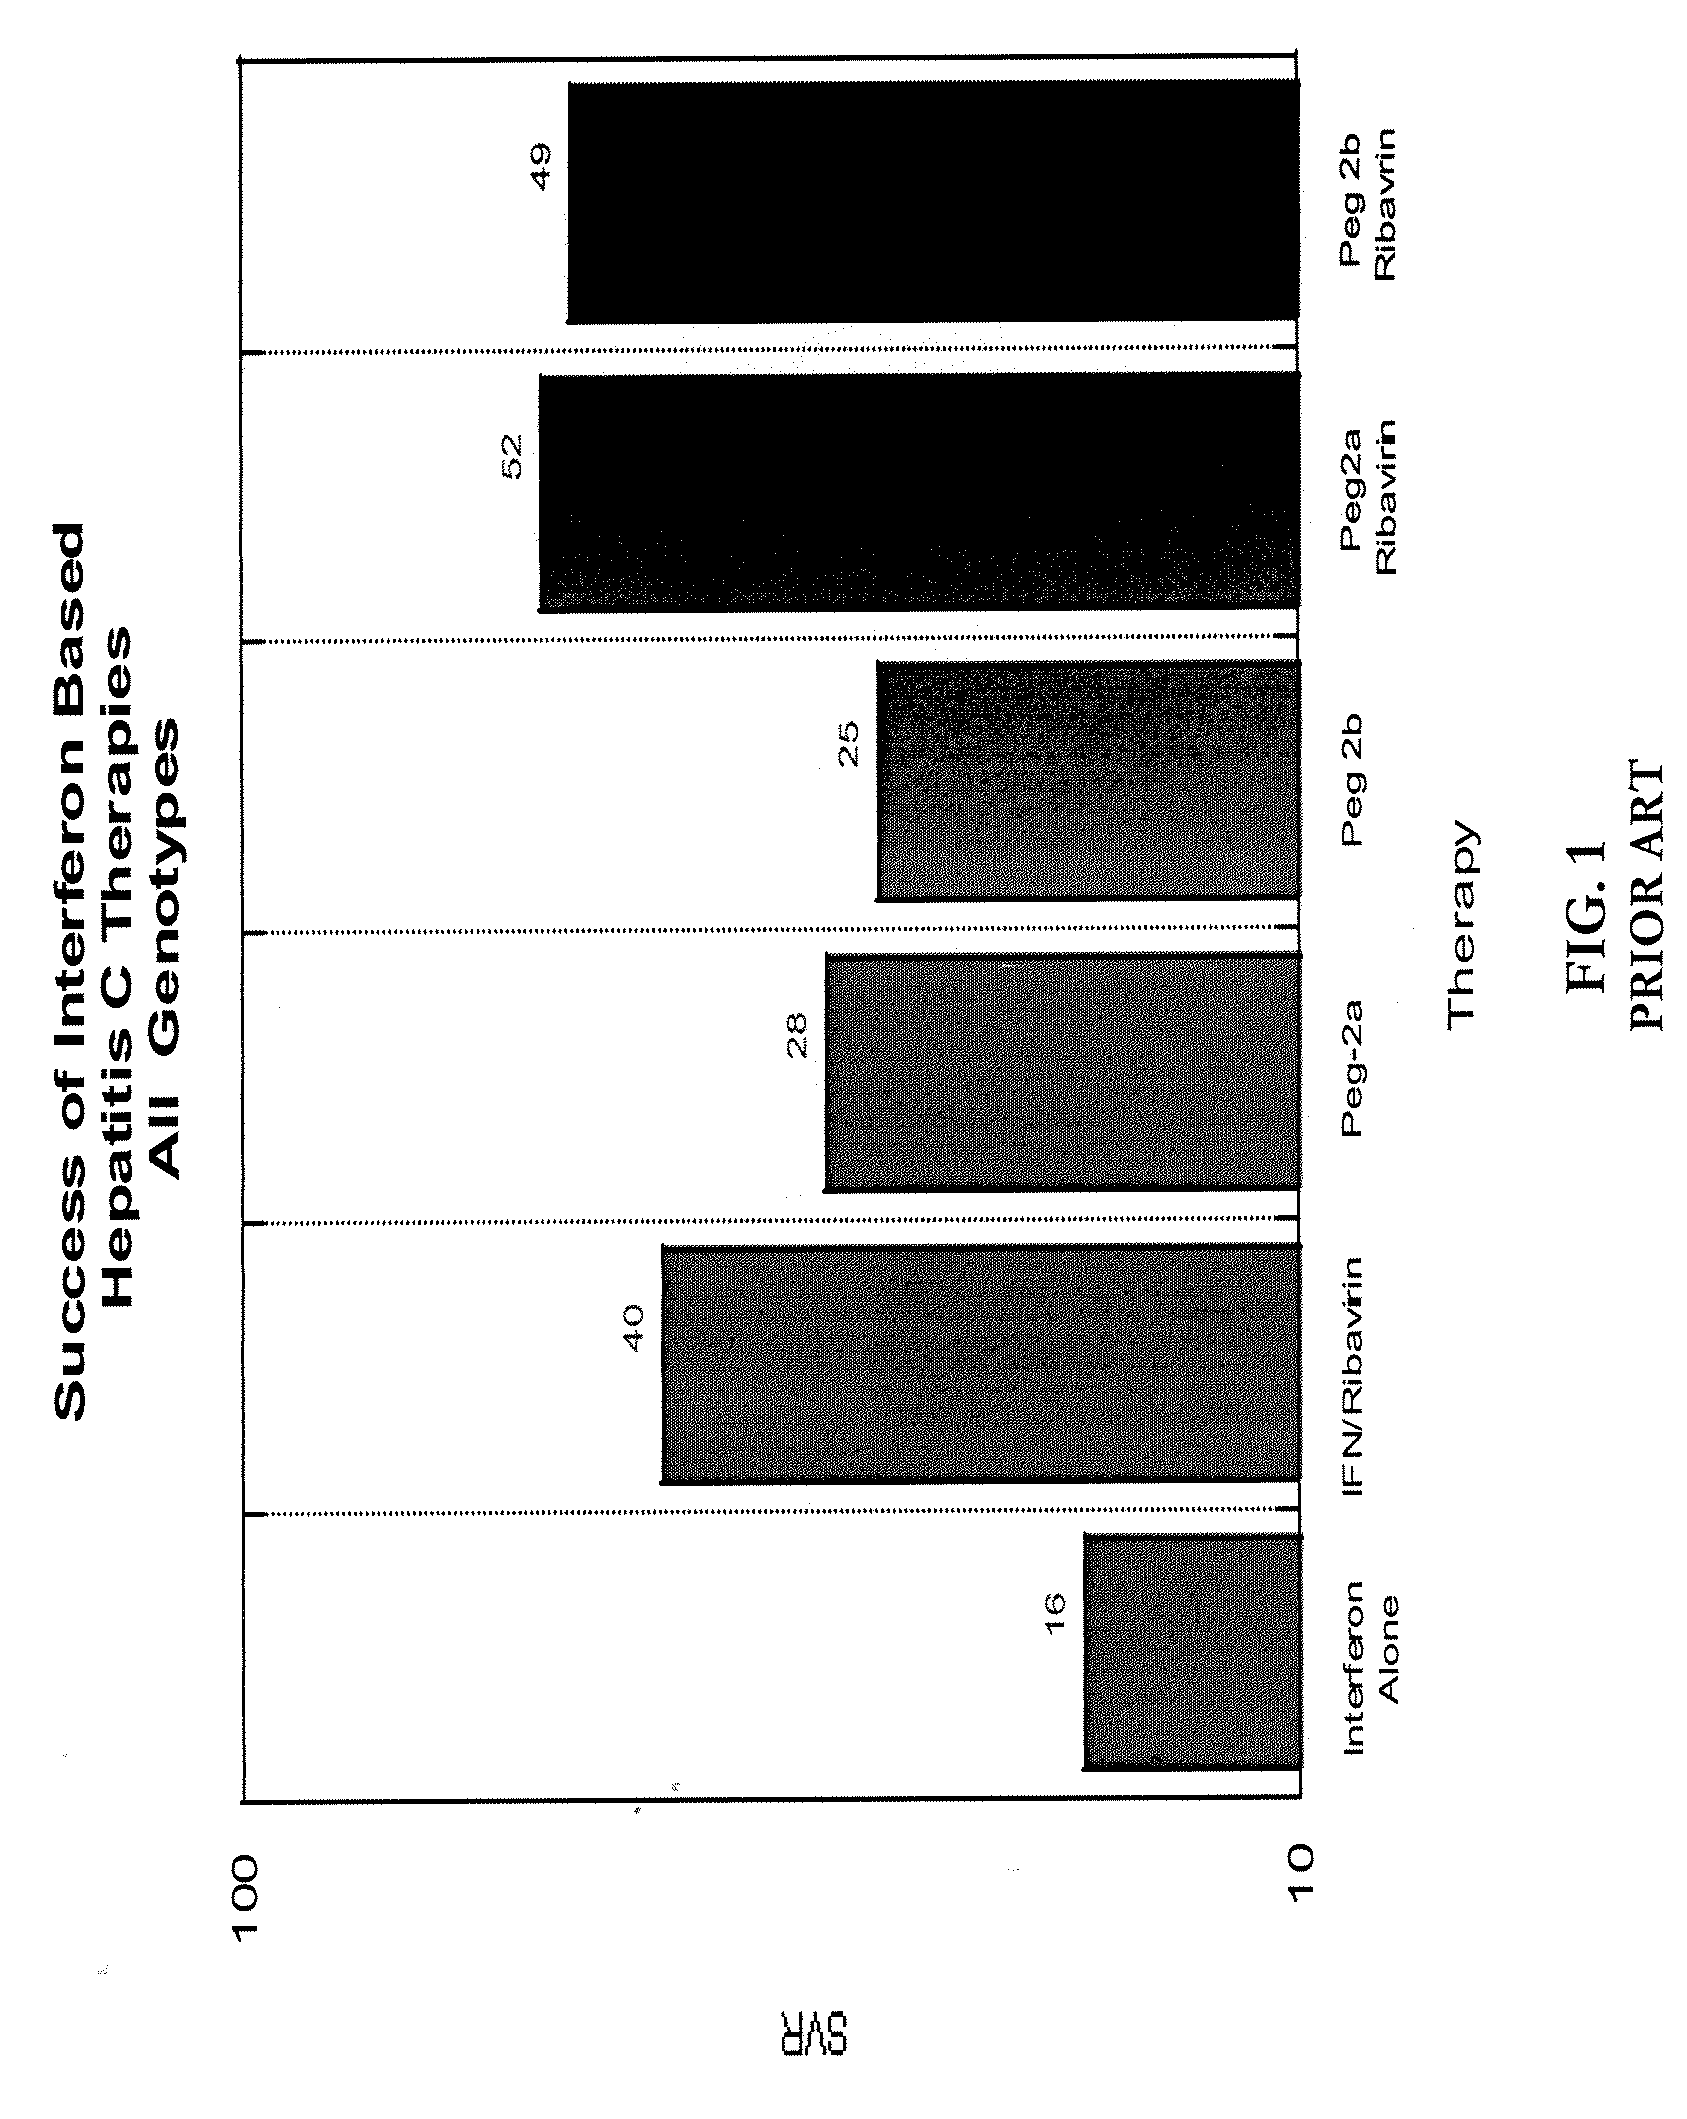 Pharmacokinetic control for optimized interferon delivery